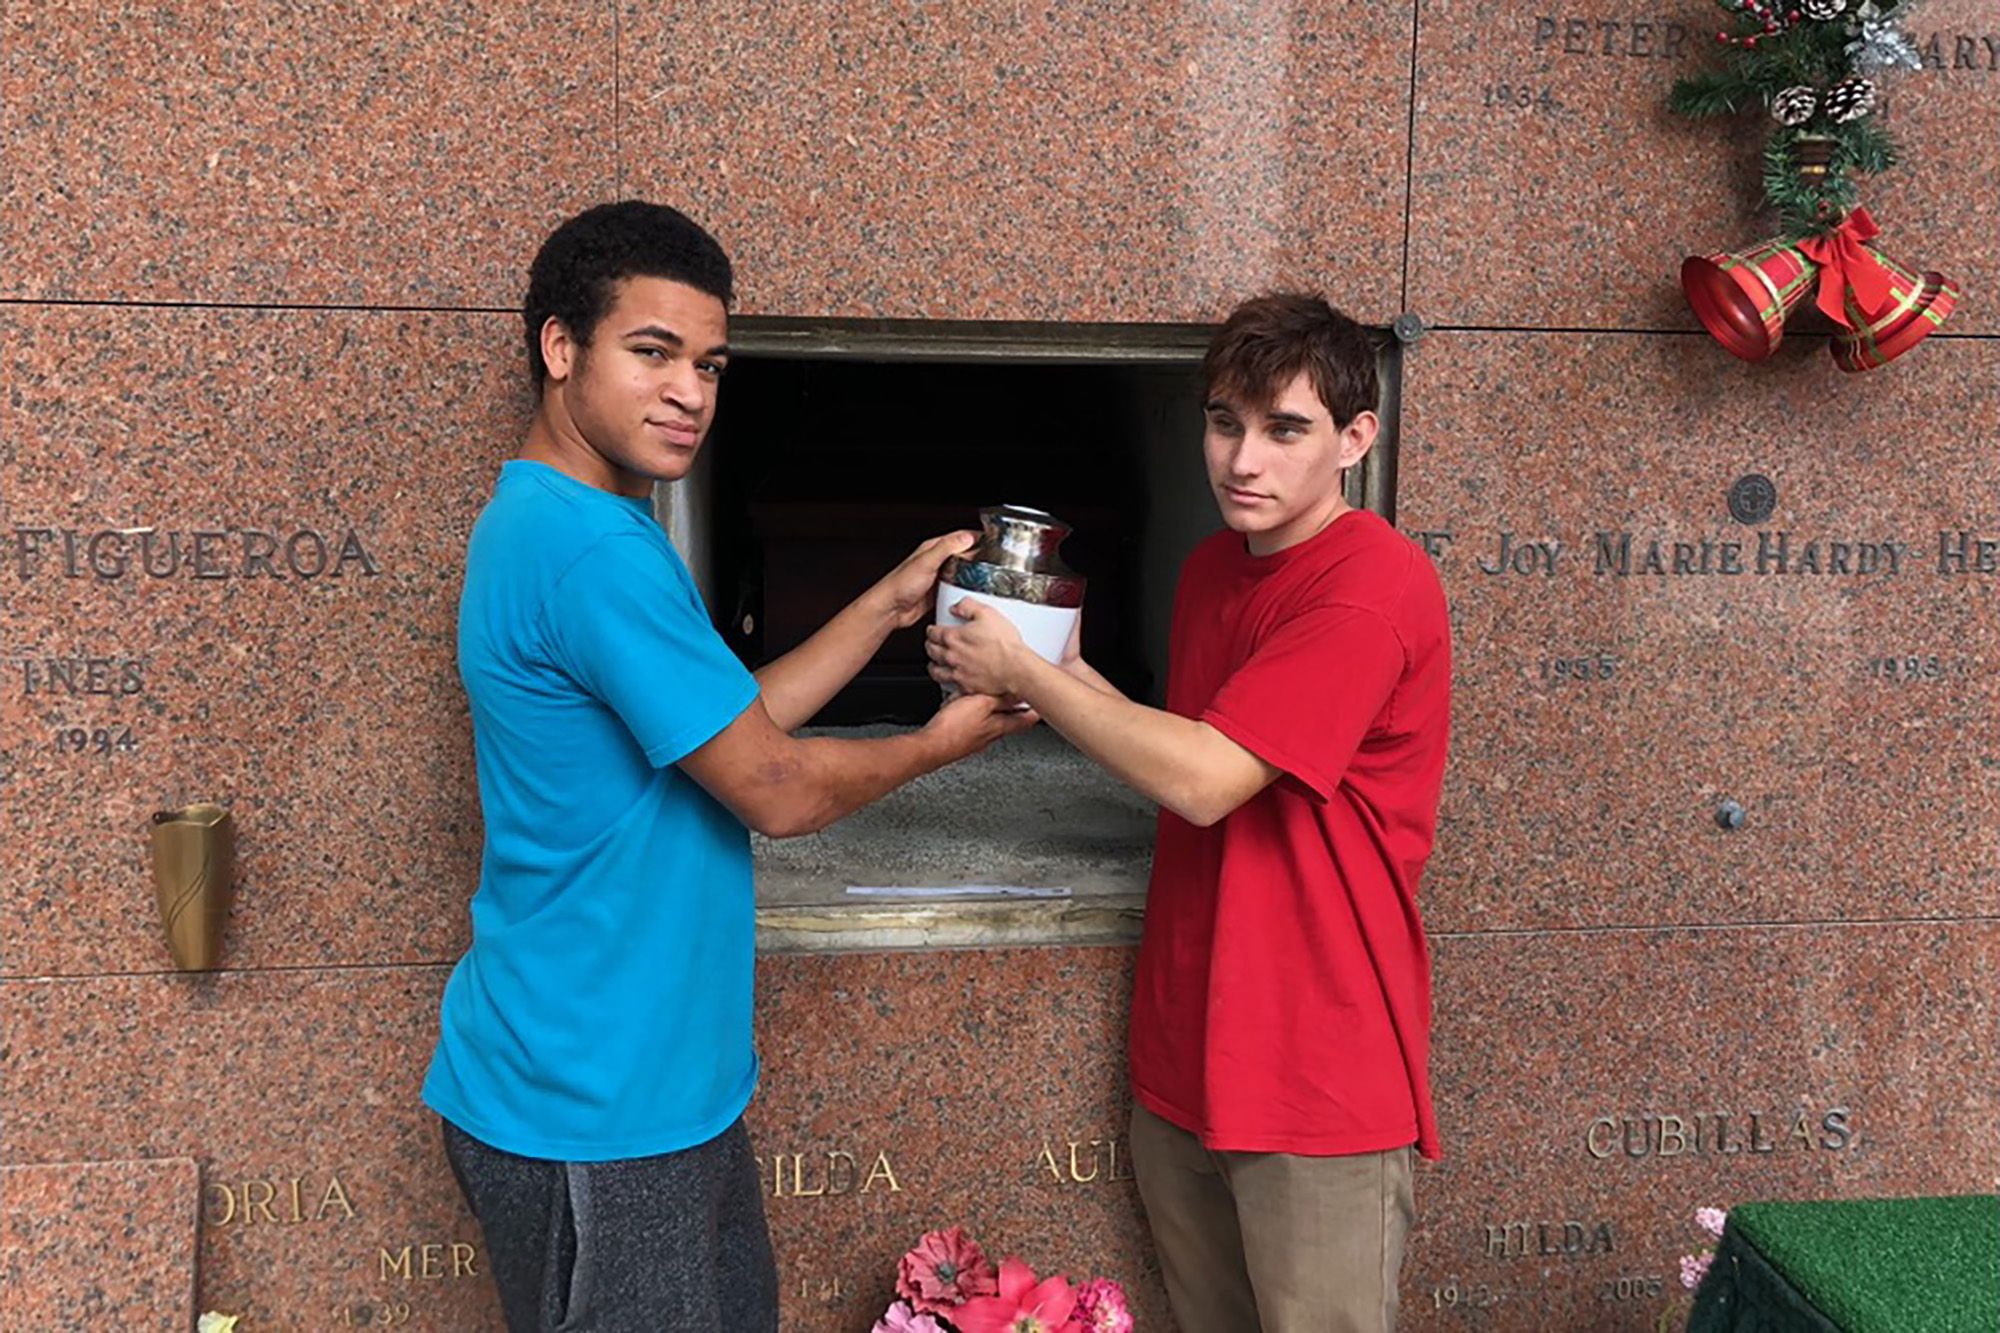 Photo shows accused Florida gunman, his brother holding mom’s ashes